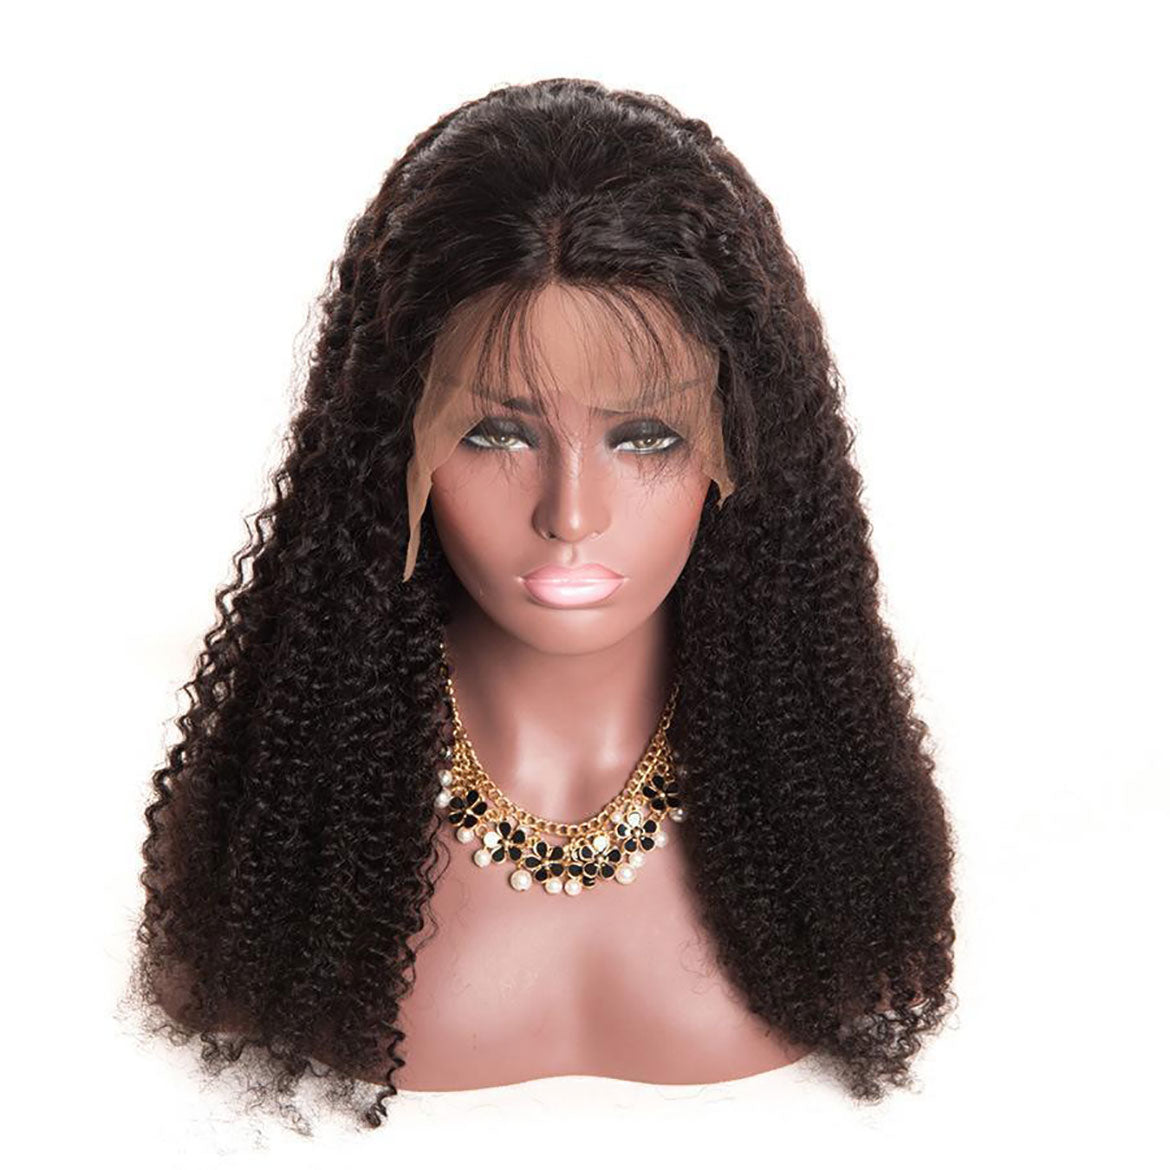 VRBest Undetectable 13x4 Lace Front Wigs Curly Human Hair Wigs